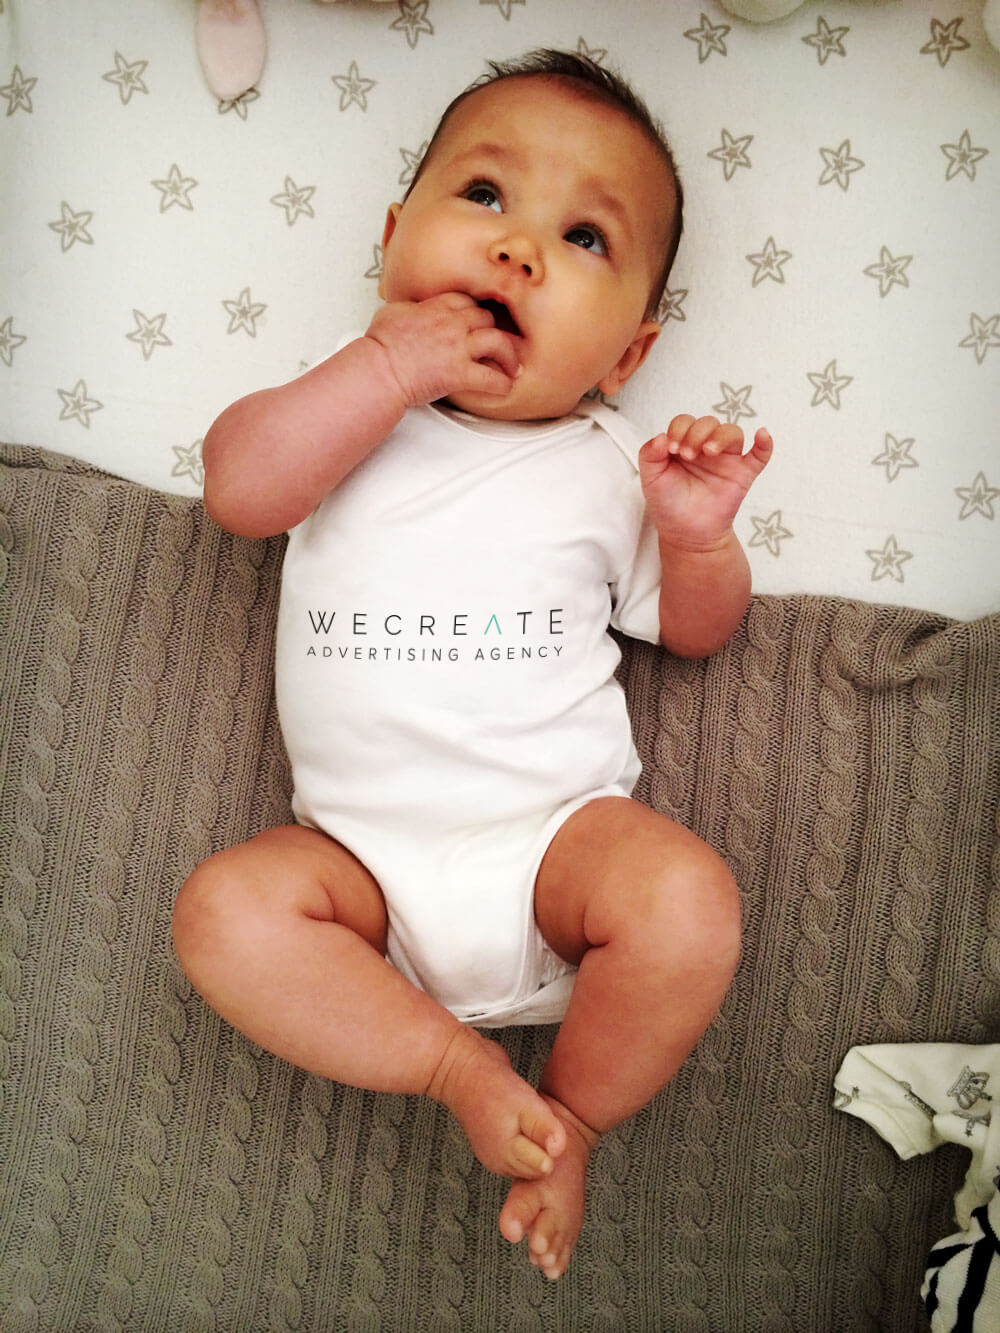 advertising agency singapore WECREATE baby branding - Expansion of the team :)